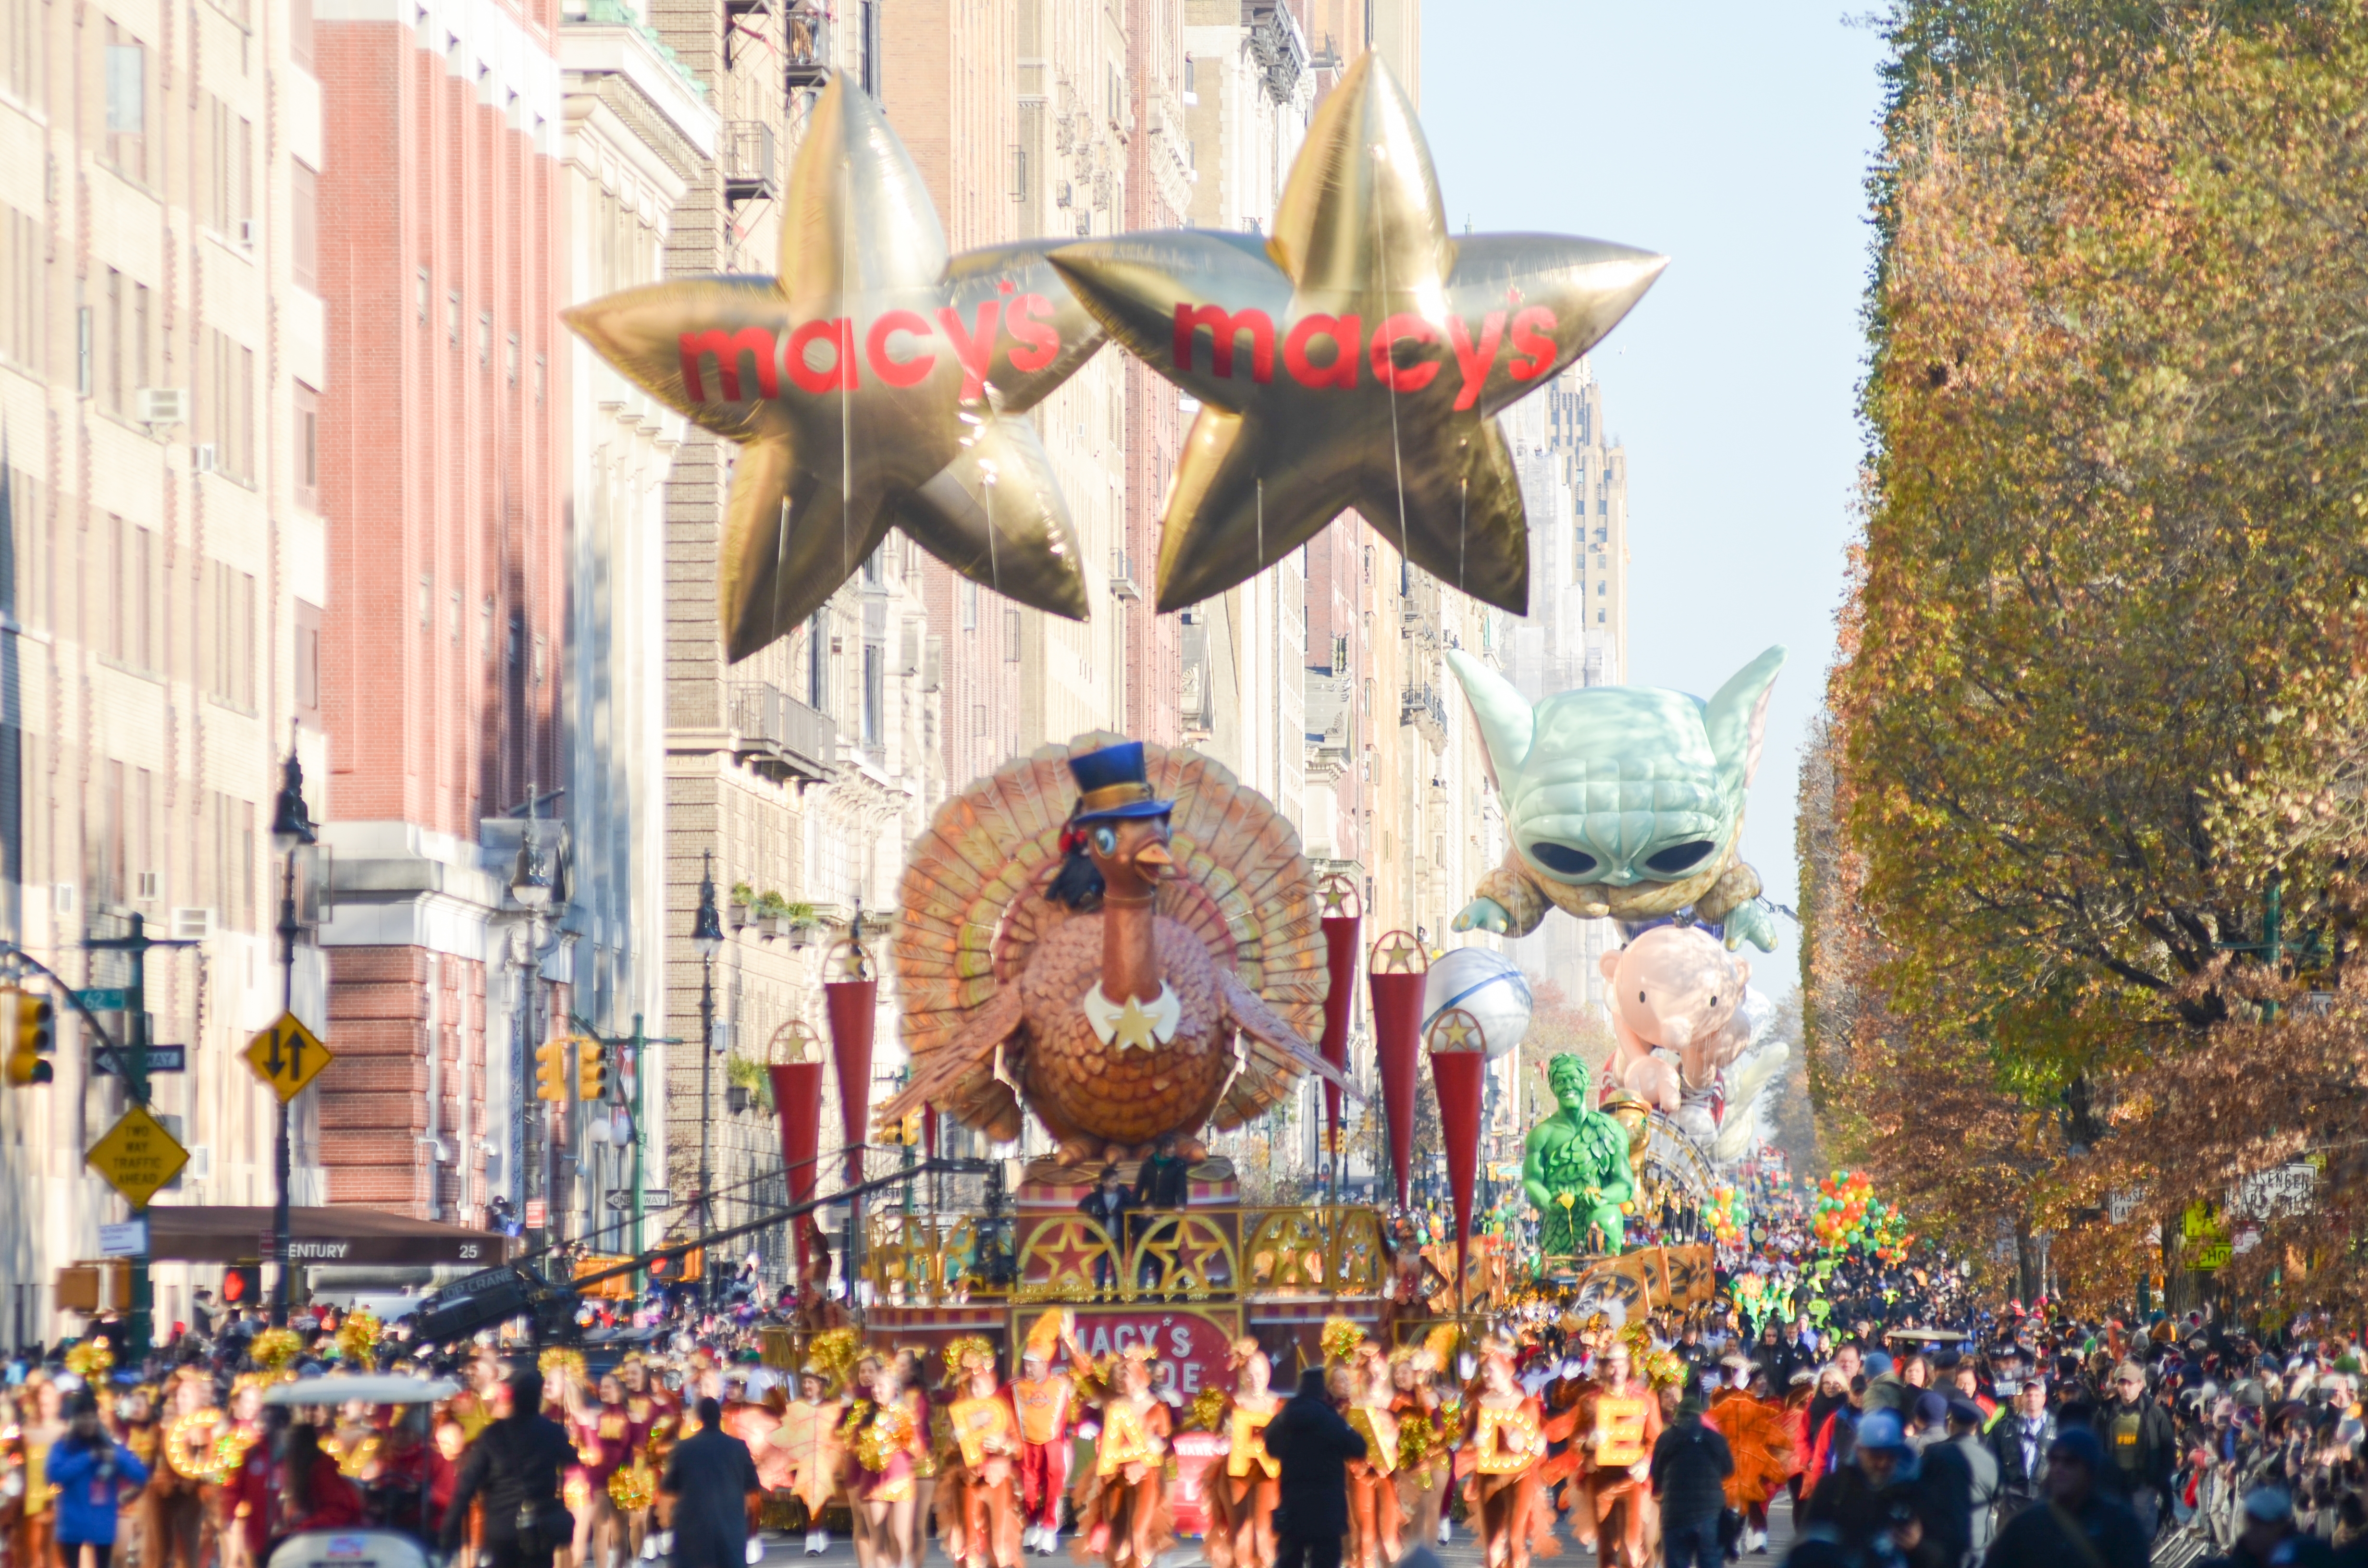 The 96th annual Macy's Thanksgiving Day Parade | Source: Shutterstock